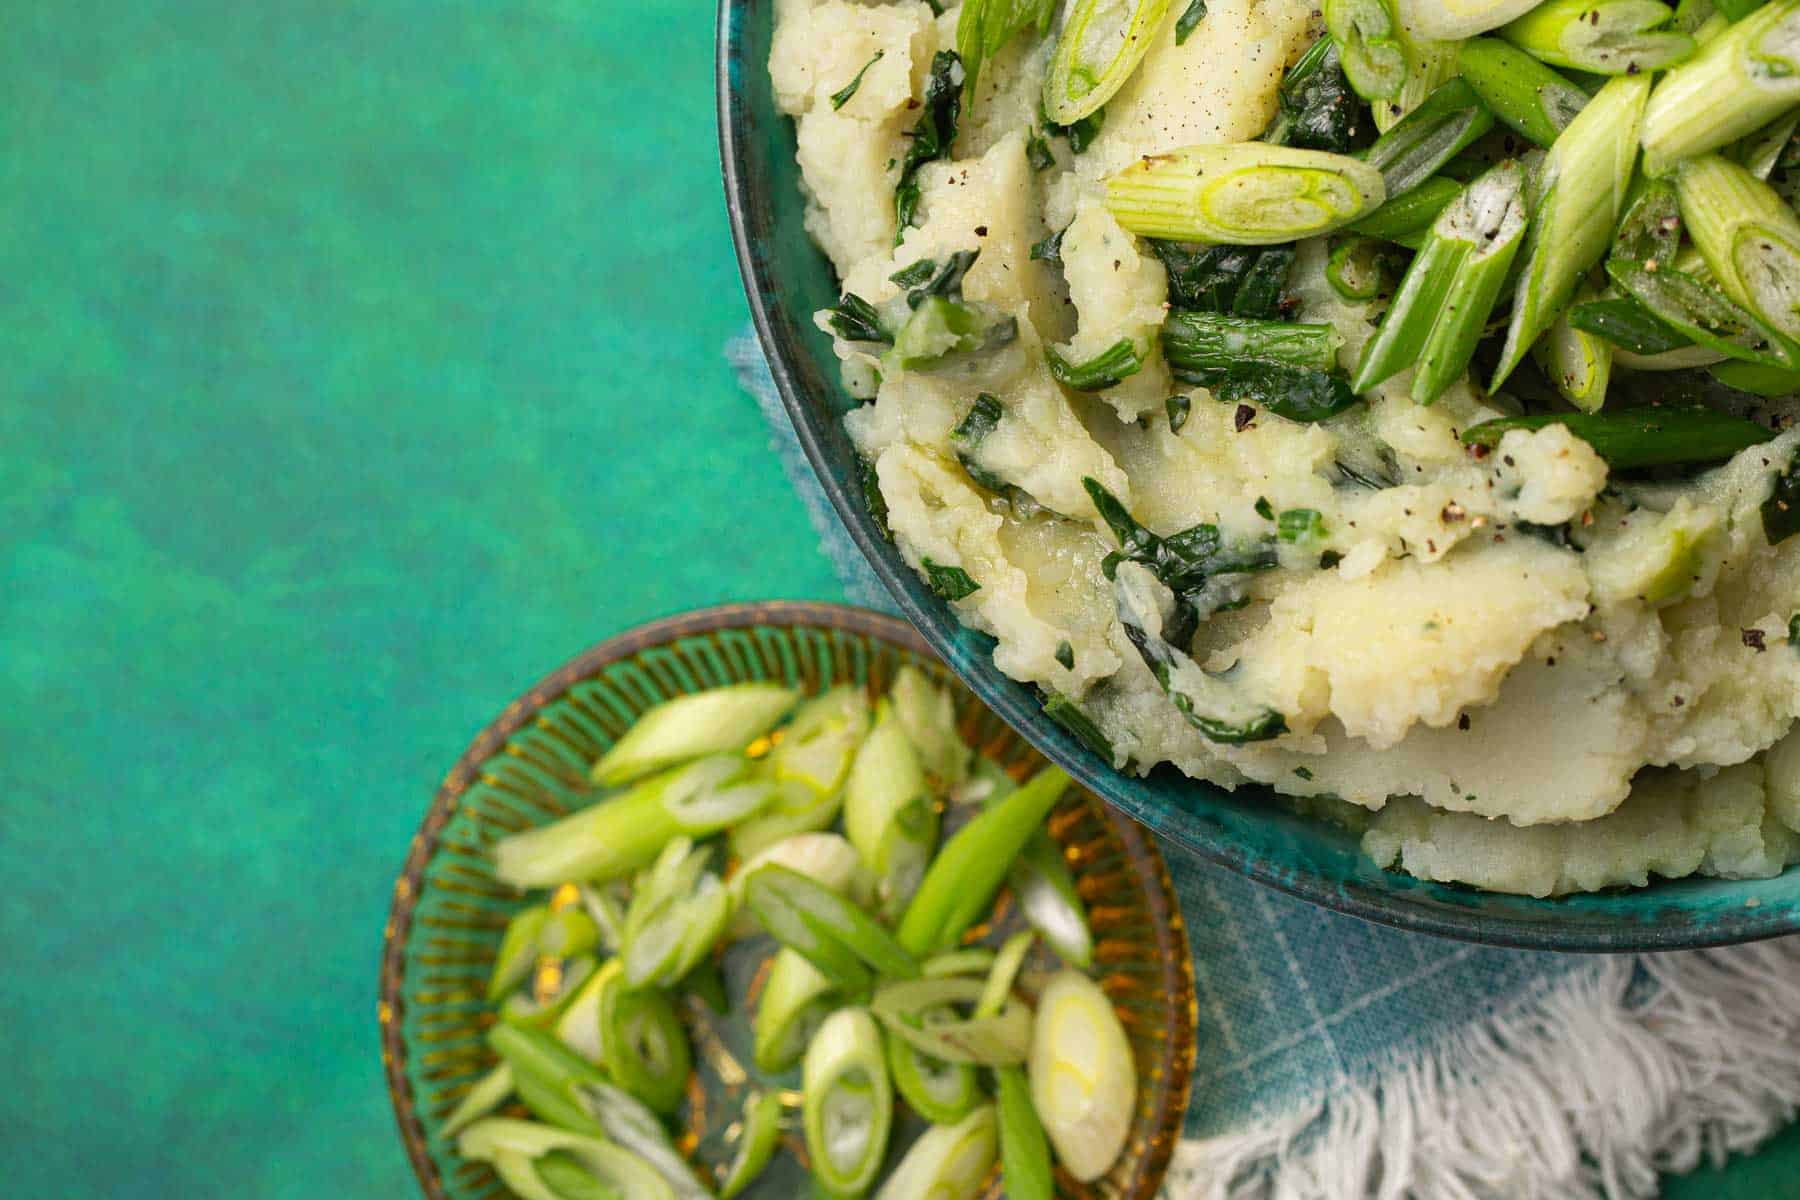 Irish colcannon with scallions in a bowl on a table.